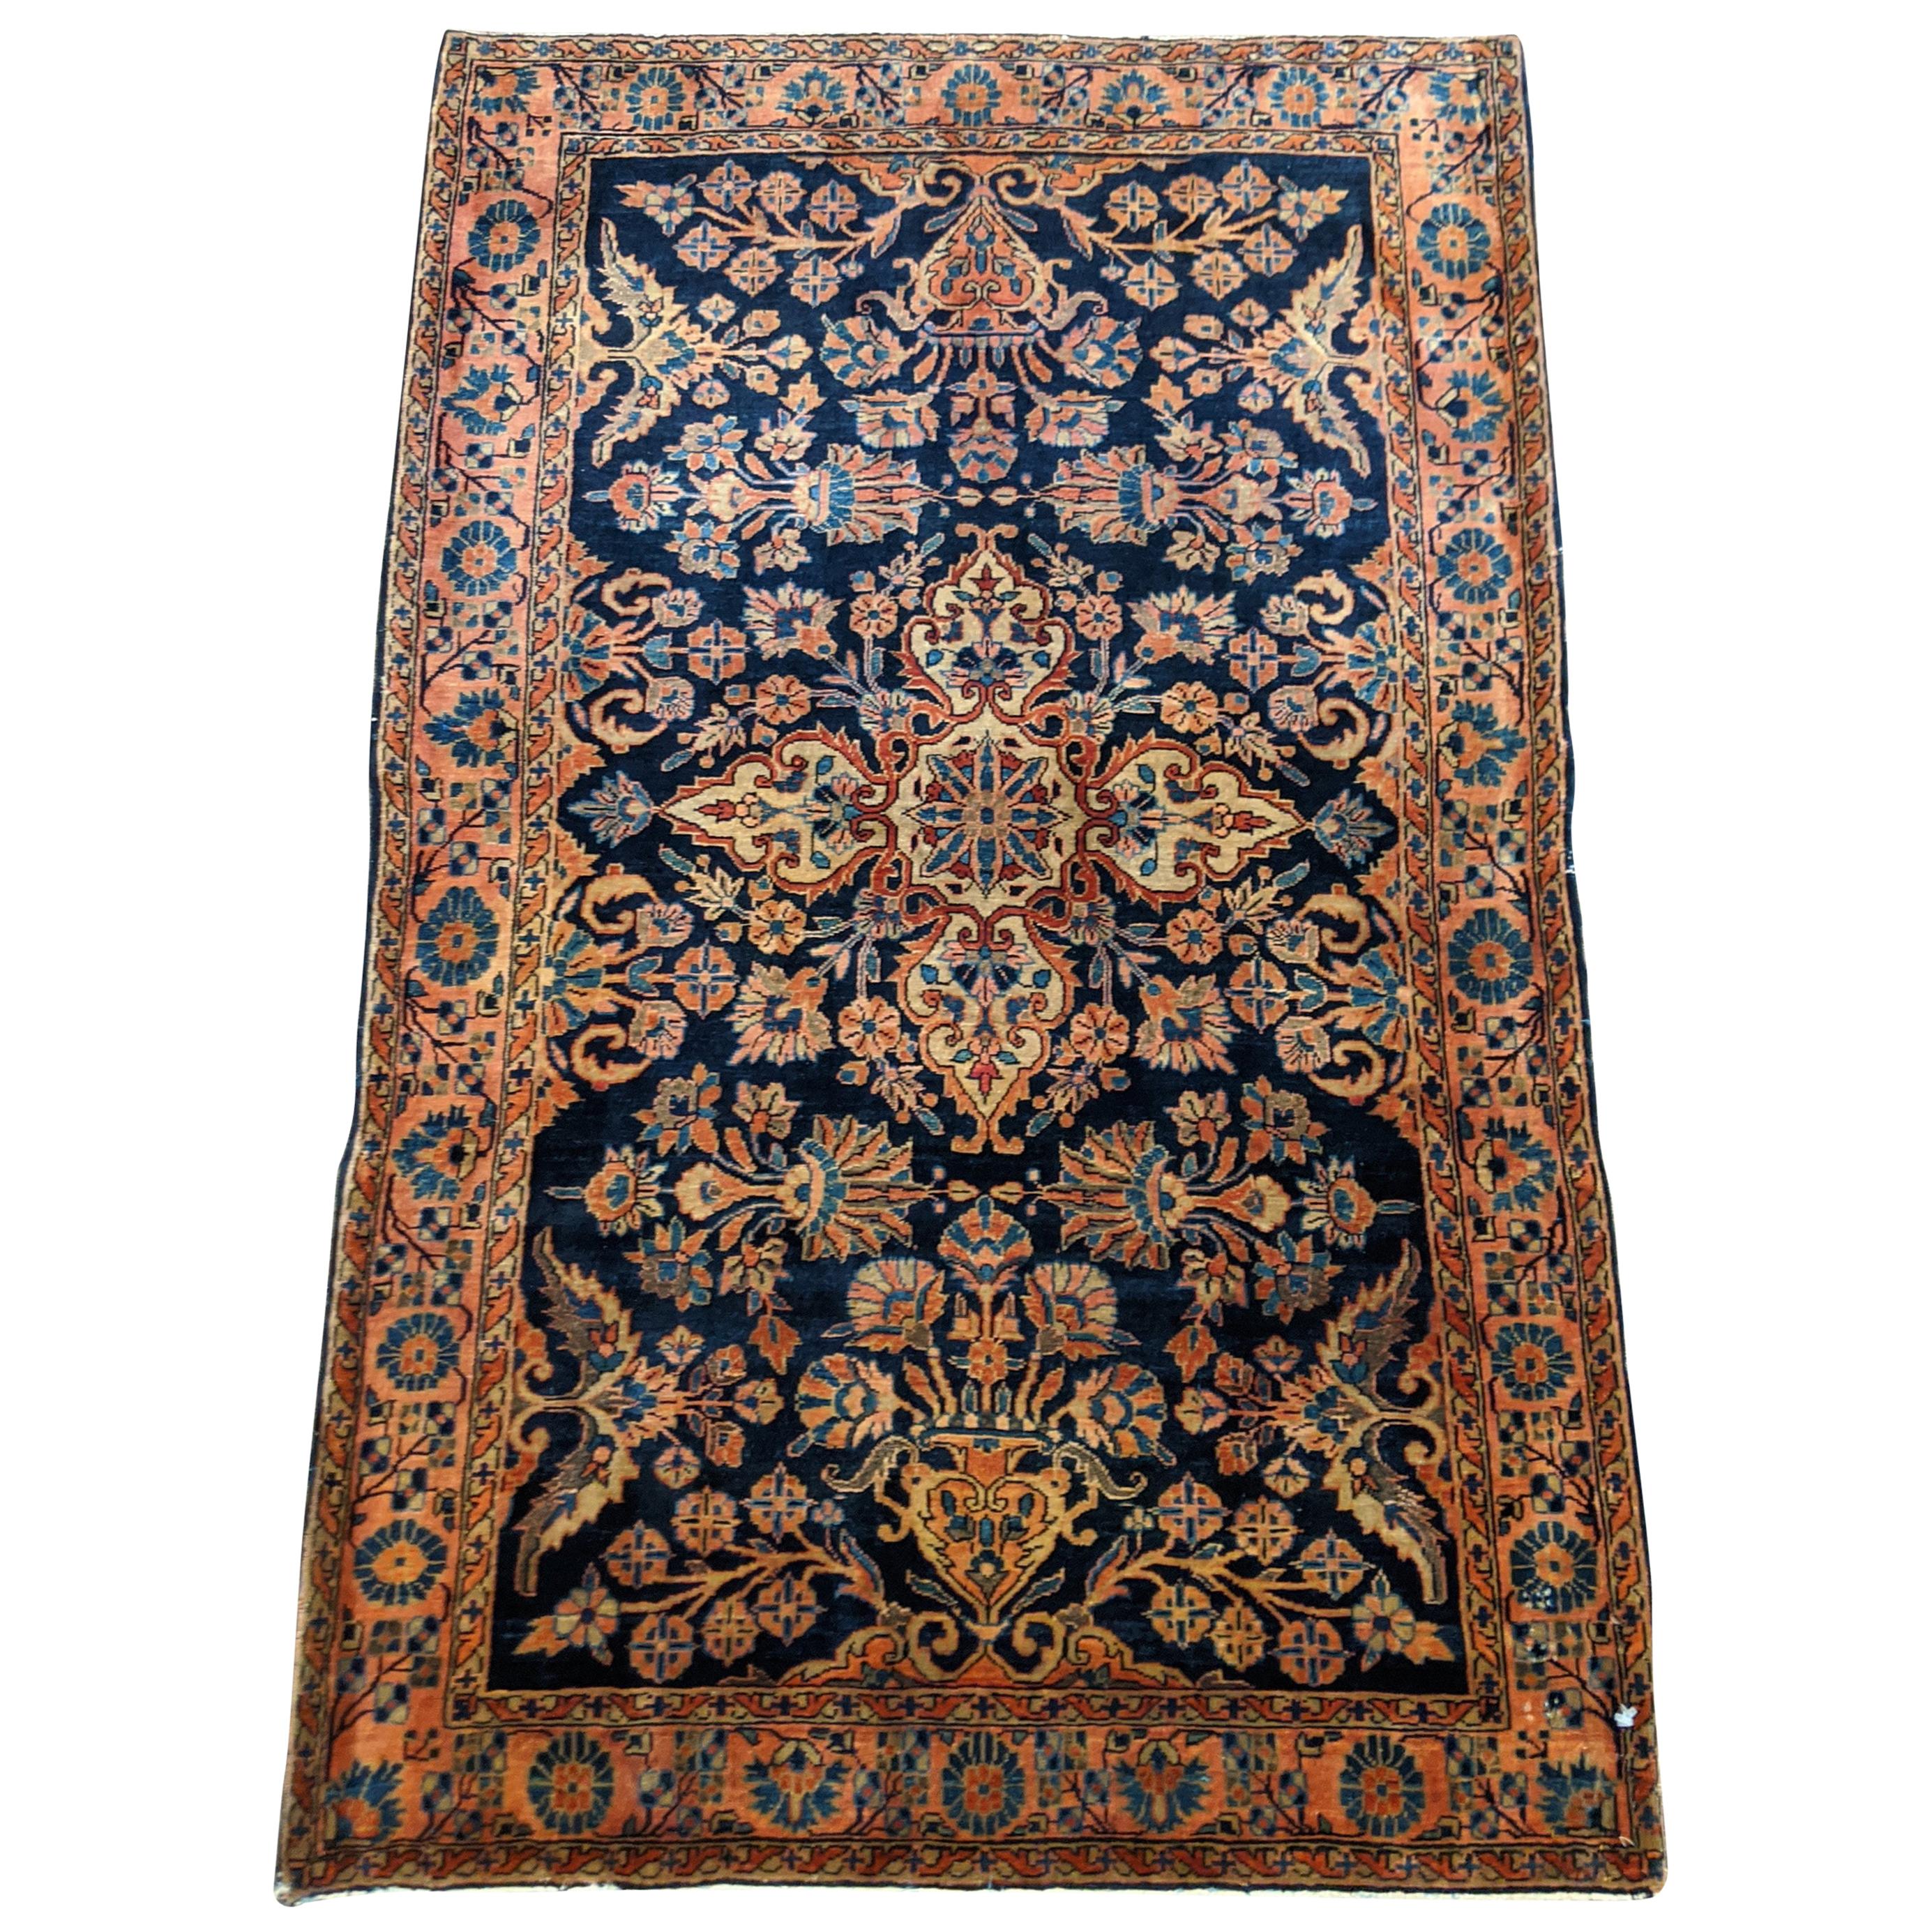 Antique Persian Sarouk, silky wool All-Over Design on Navy Field, Wool, 3x5 1915 For Sale